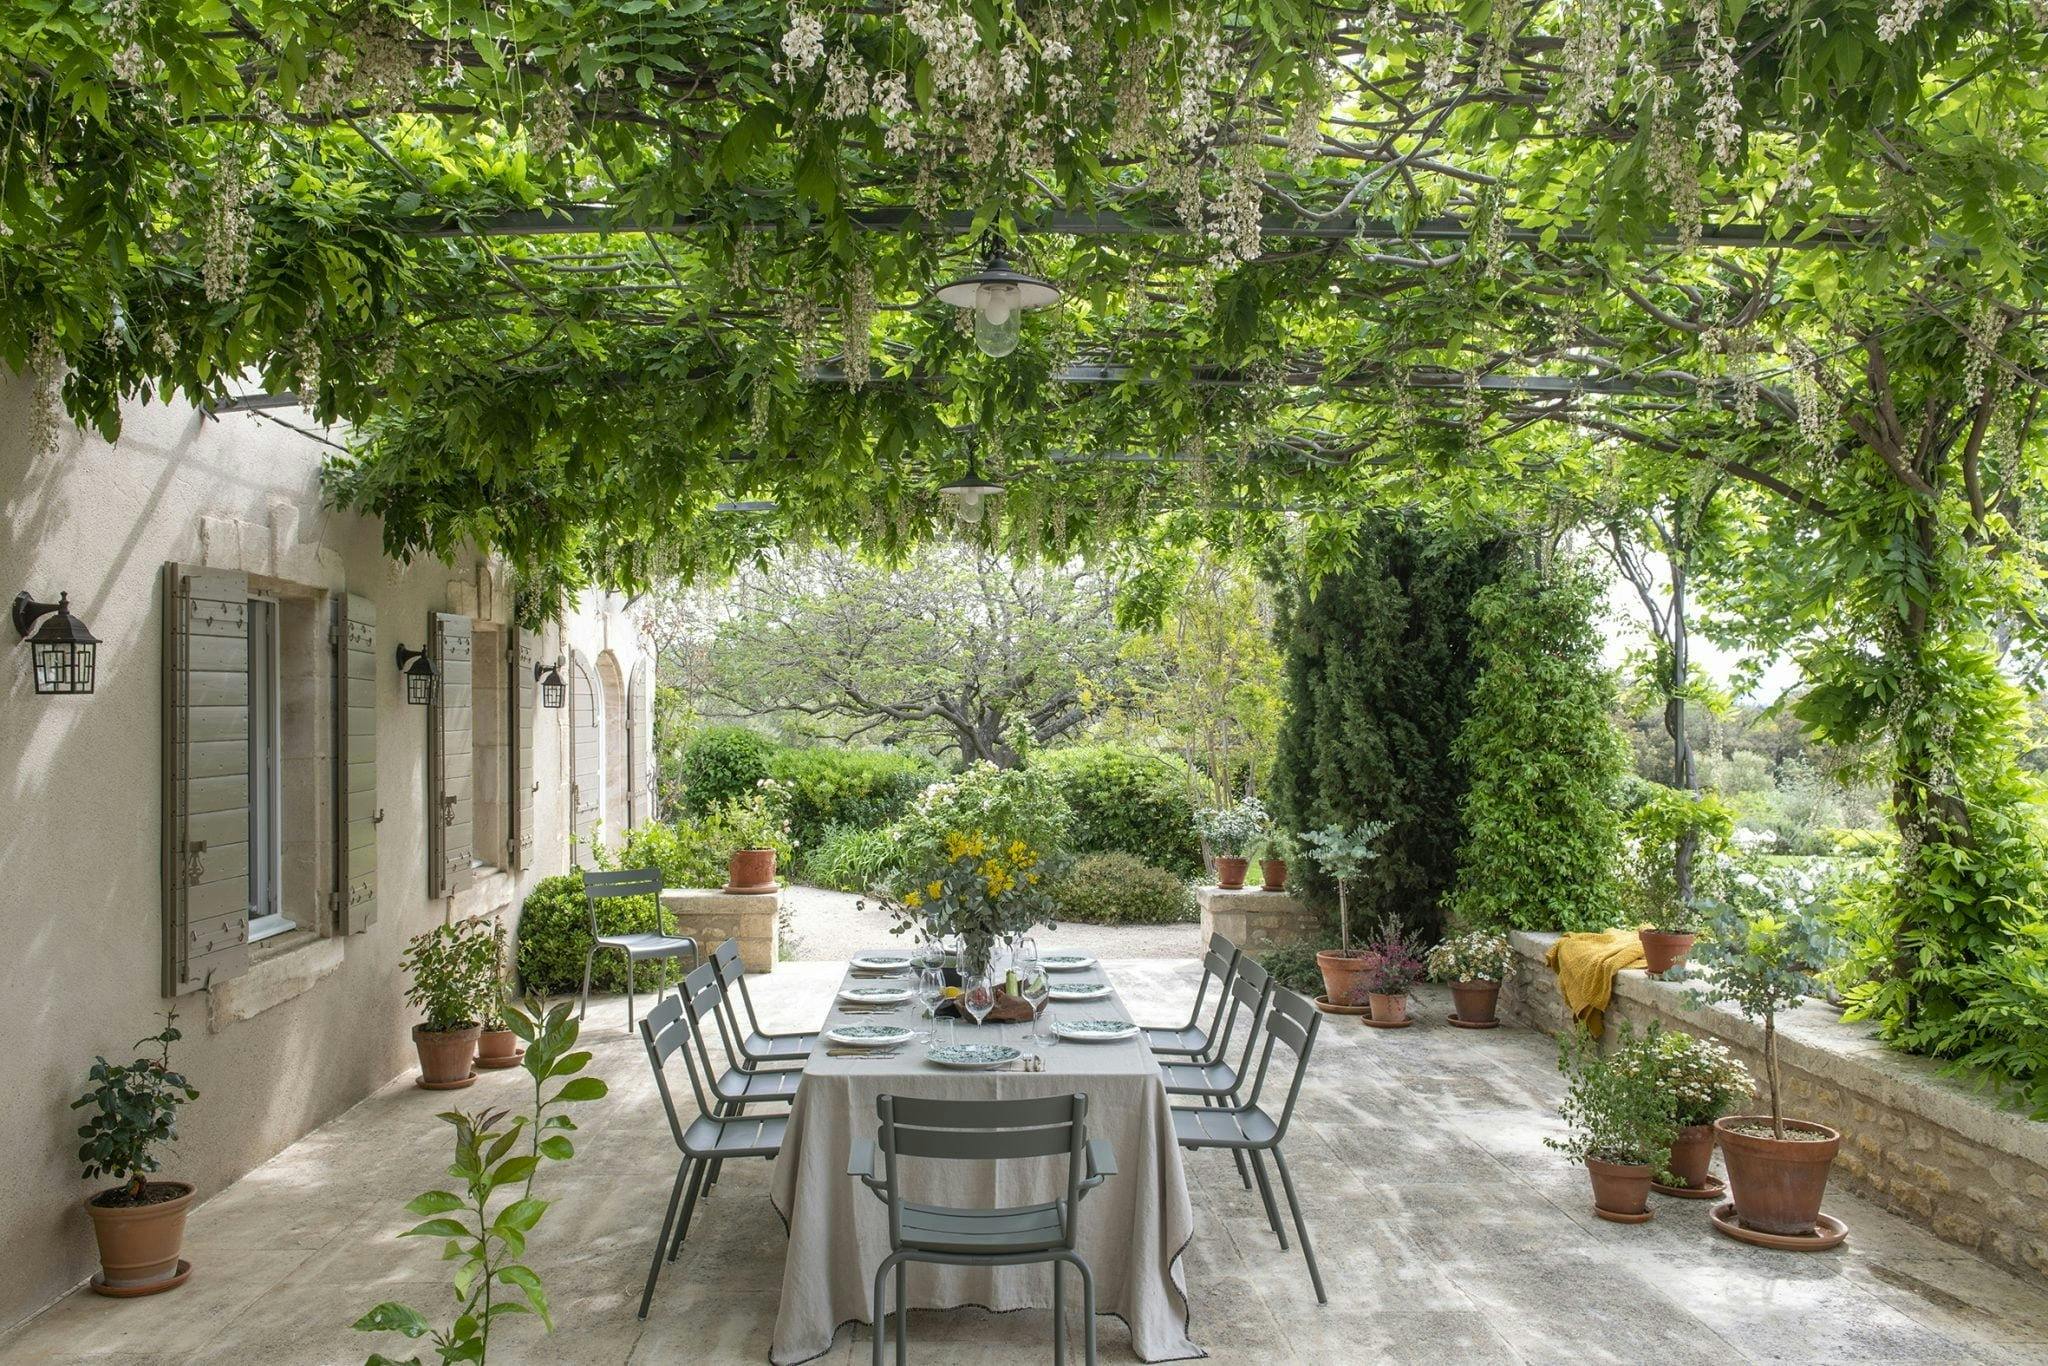 Country house, outdoor table and chairs under pergola with trees